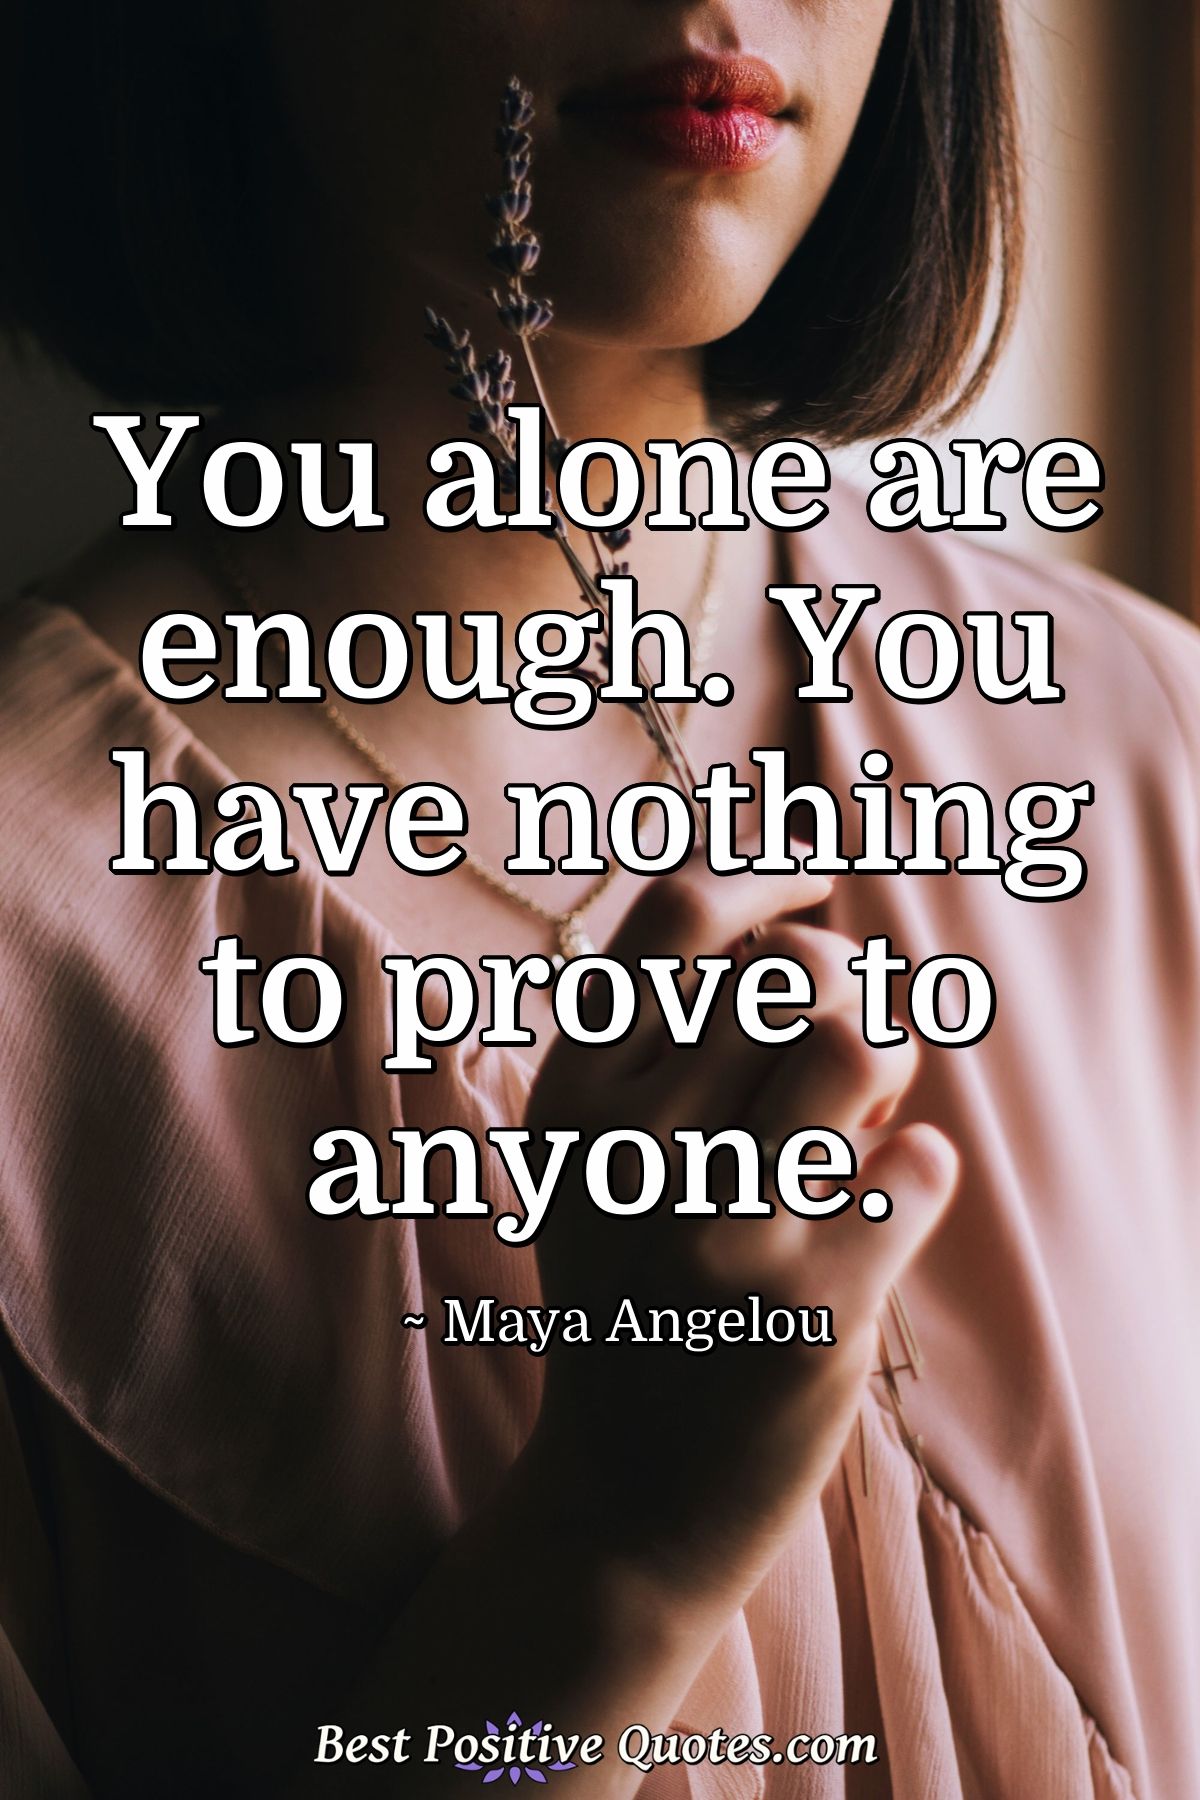 You alone are enough. You have nothing to prove to anyone. - Maya Angelou